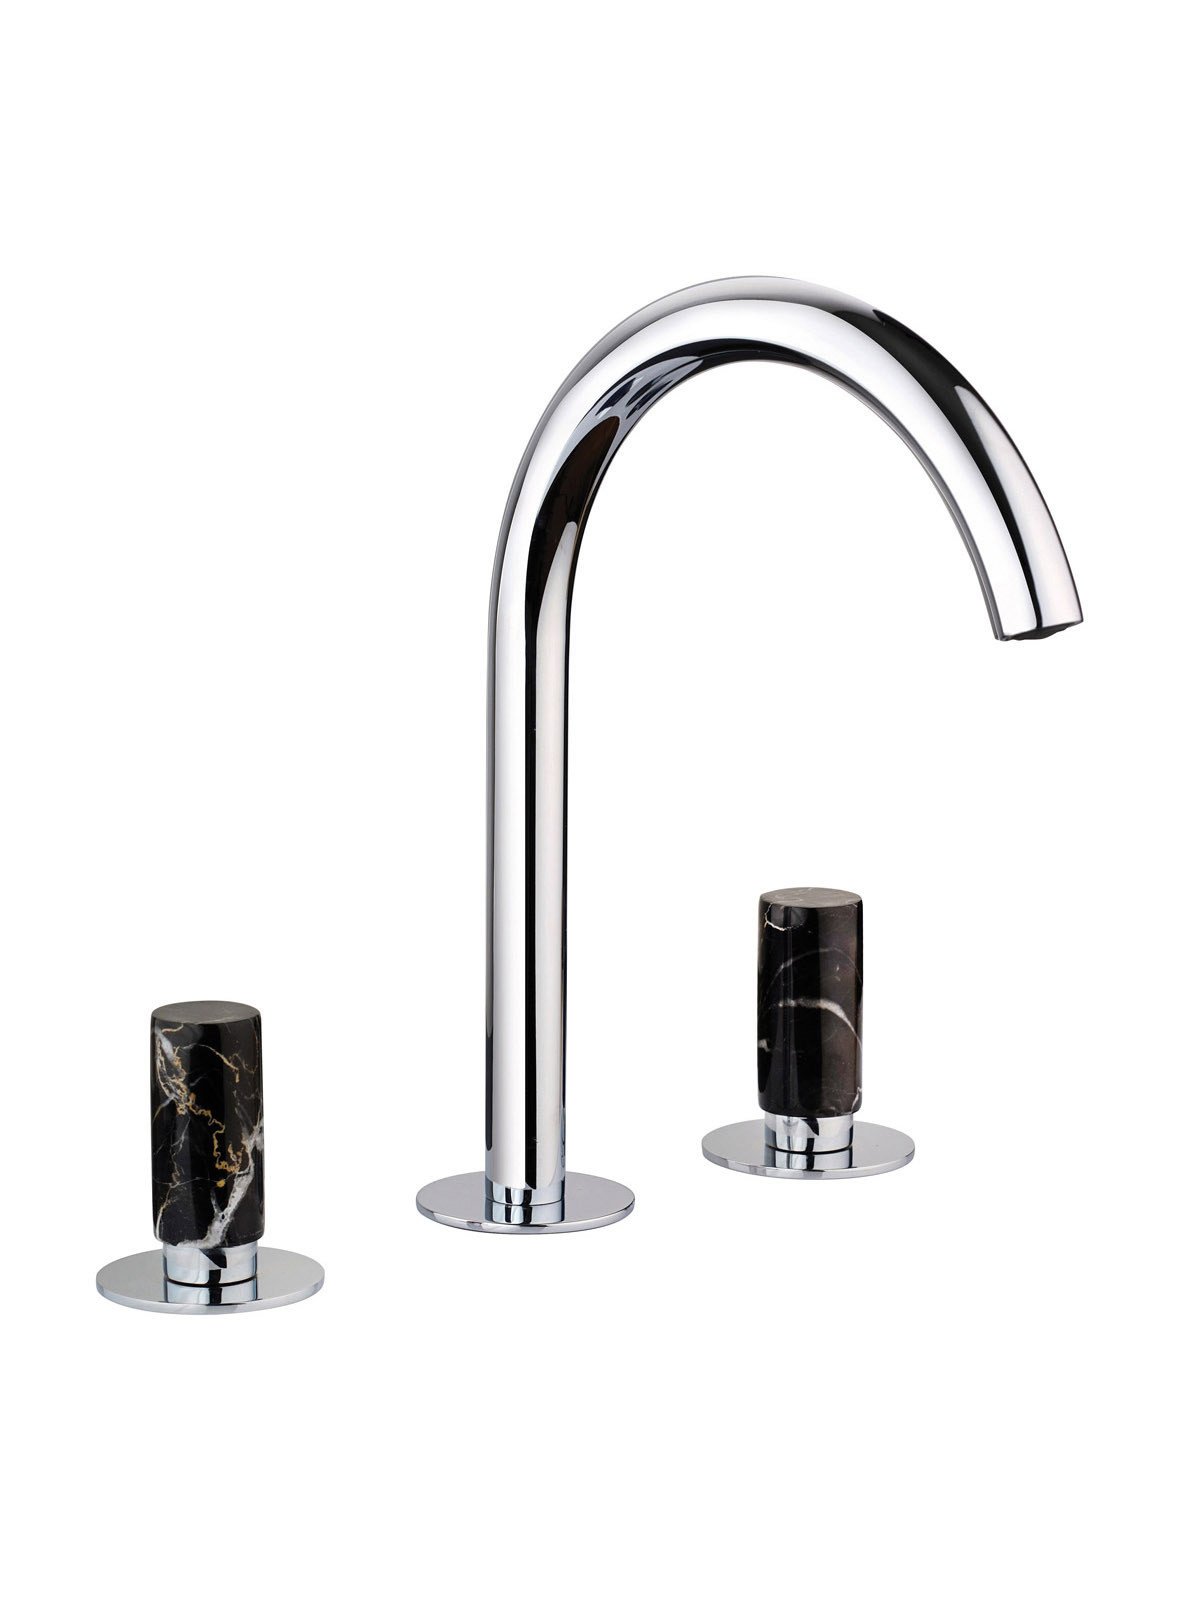 3-hole washbasin mixer with fixed spout without pop-up waste